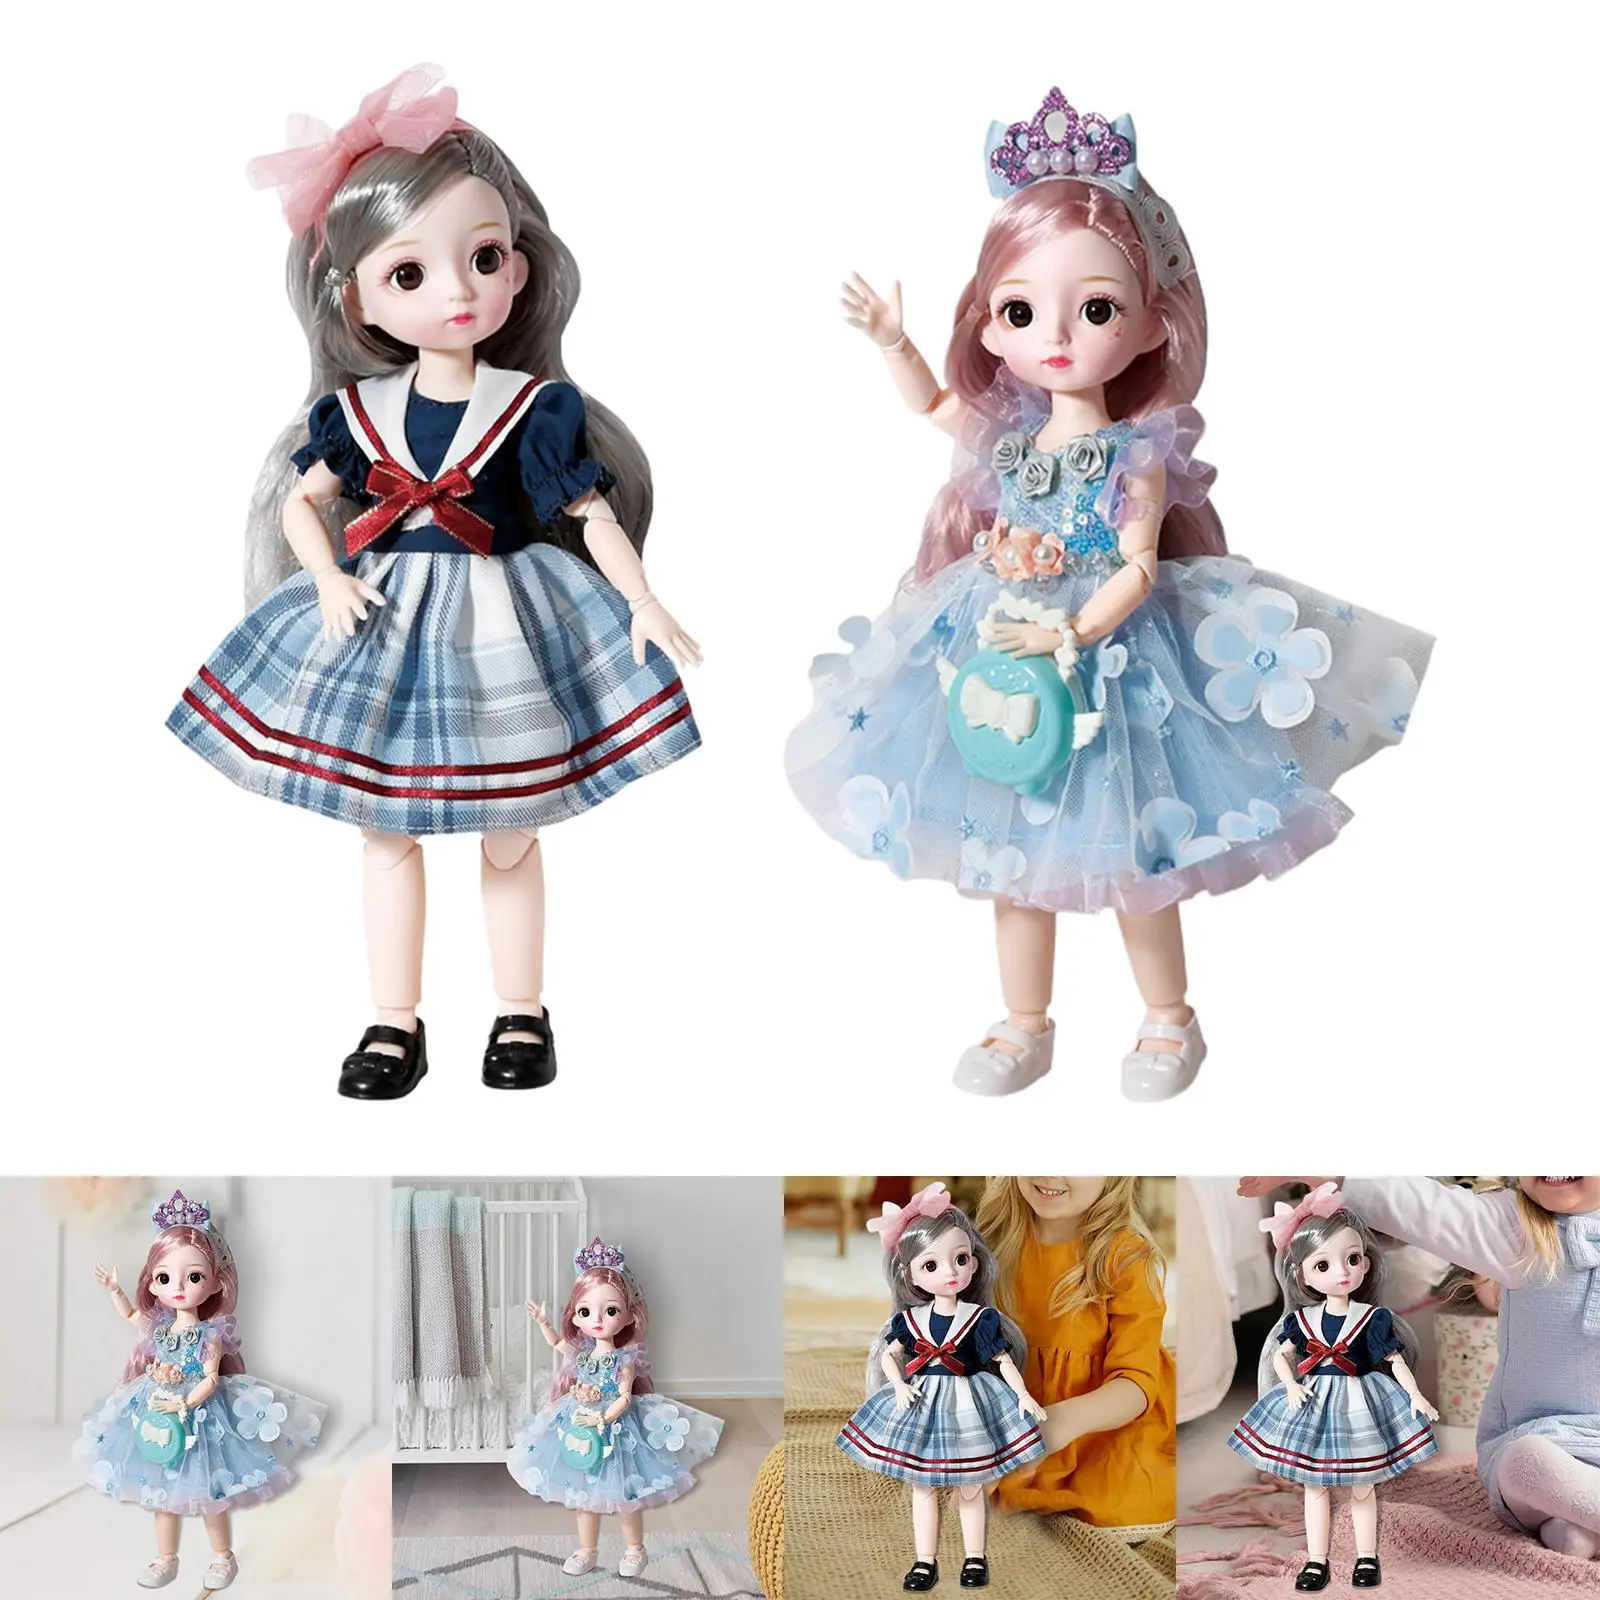 1:6 31cm Fashion Doll Flexible Joints 3D Eyes for Girls Pretend Play Gifts